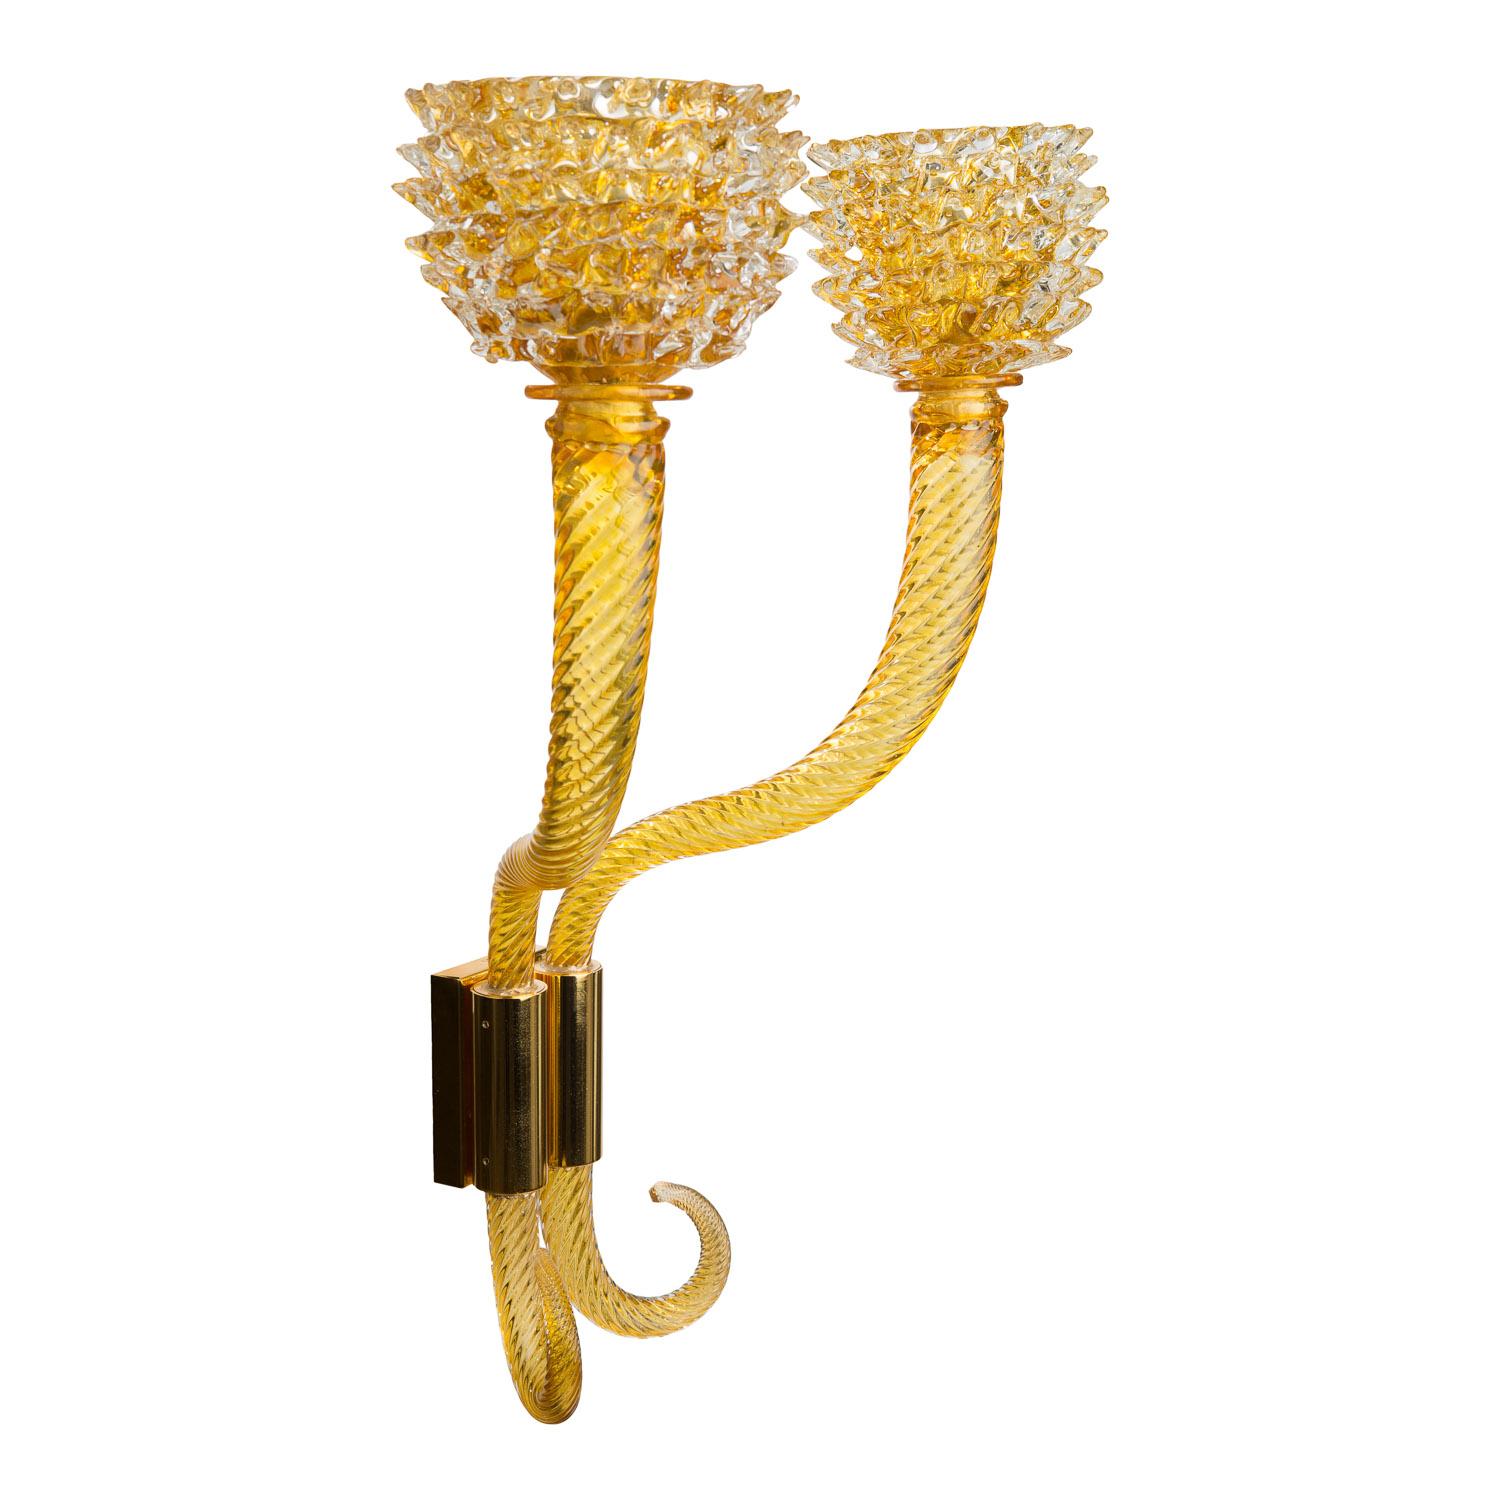 A truly unique pair of exceptionally large mouth blown Murano Glass wall sconces by the renowned master glass blowers Vetreria Artistica Rosa in Venice - only 4 pairs ever made, so a collectors item

In the Mid-Century style these Palazzo Sconces